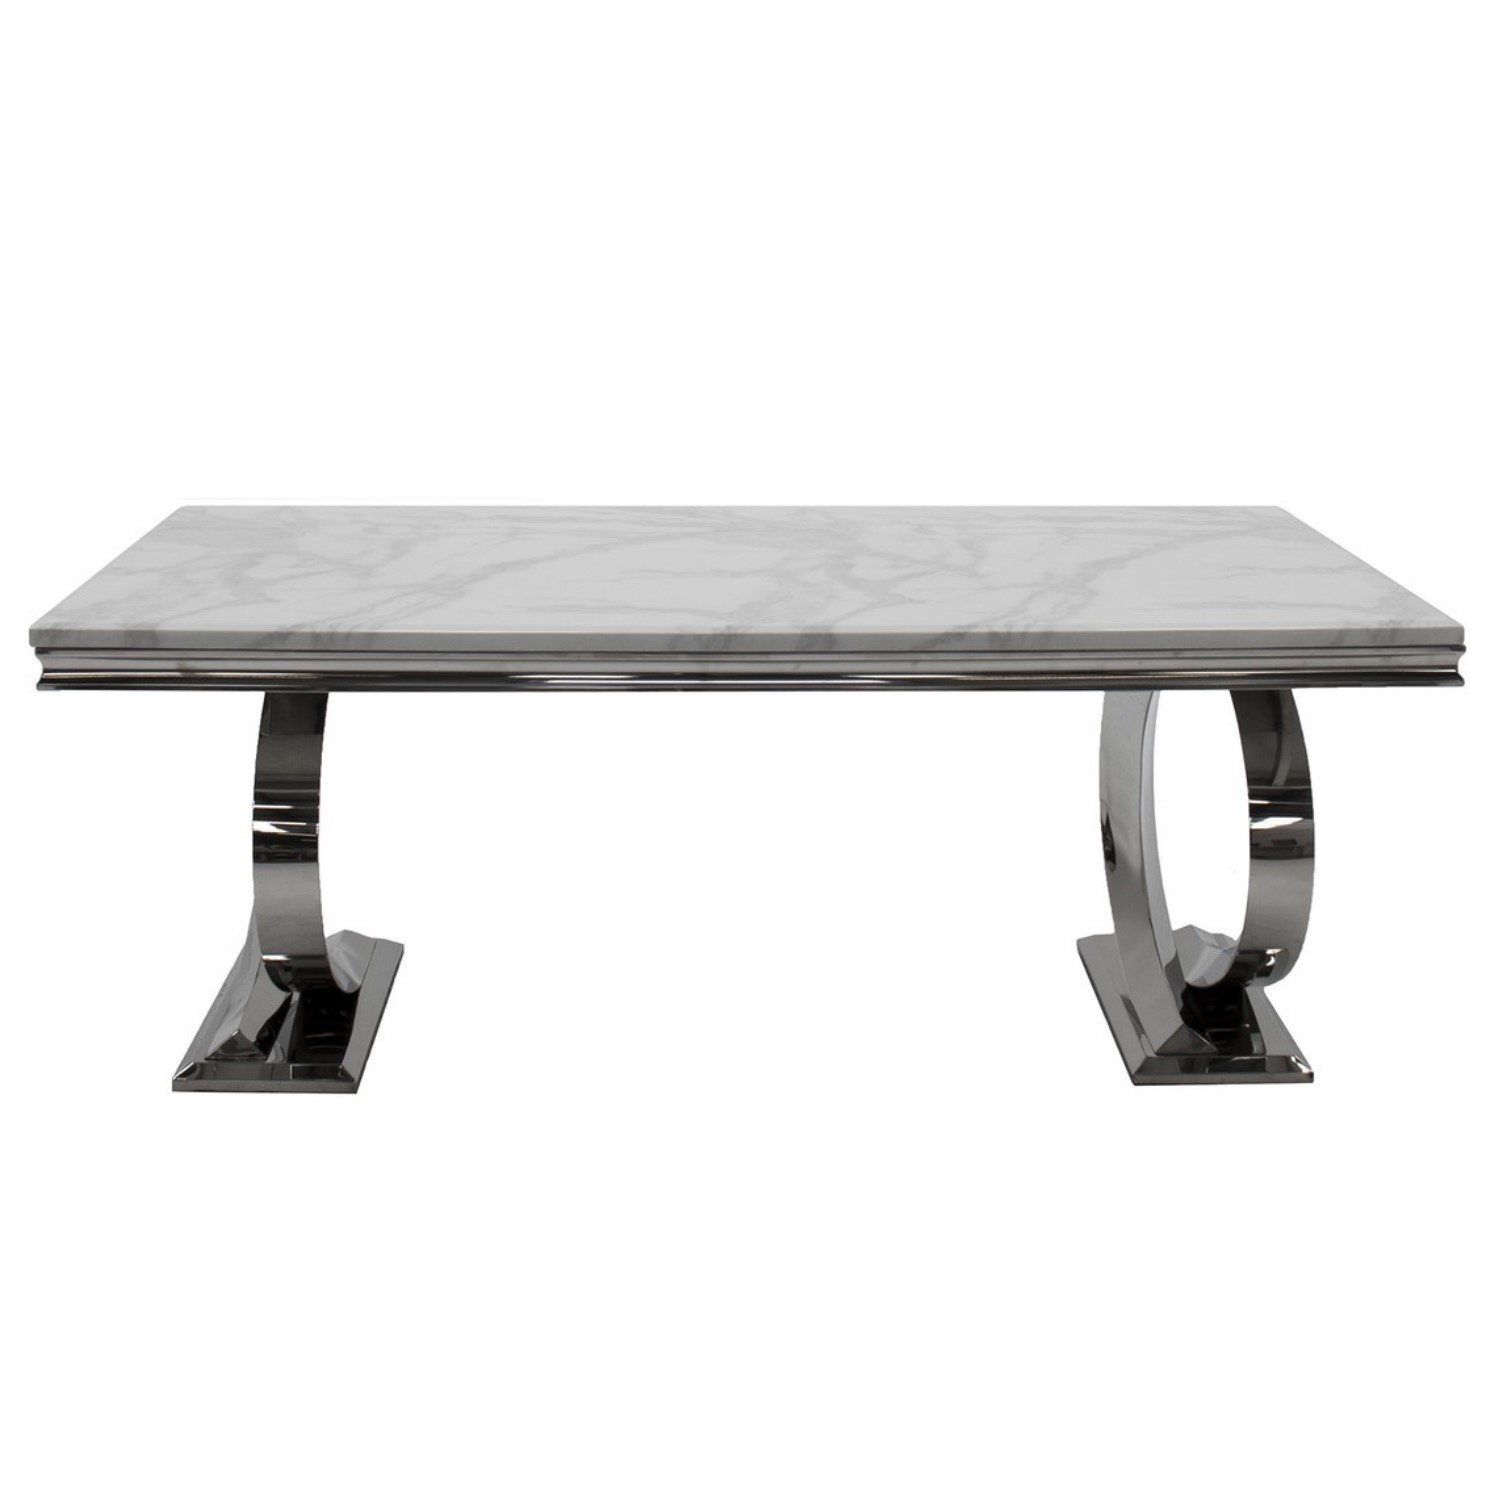 Photo of Large white marble dining table - vida living